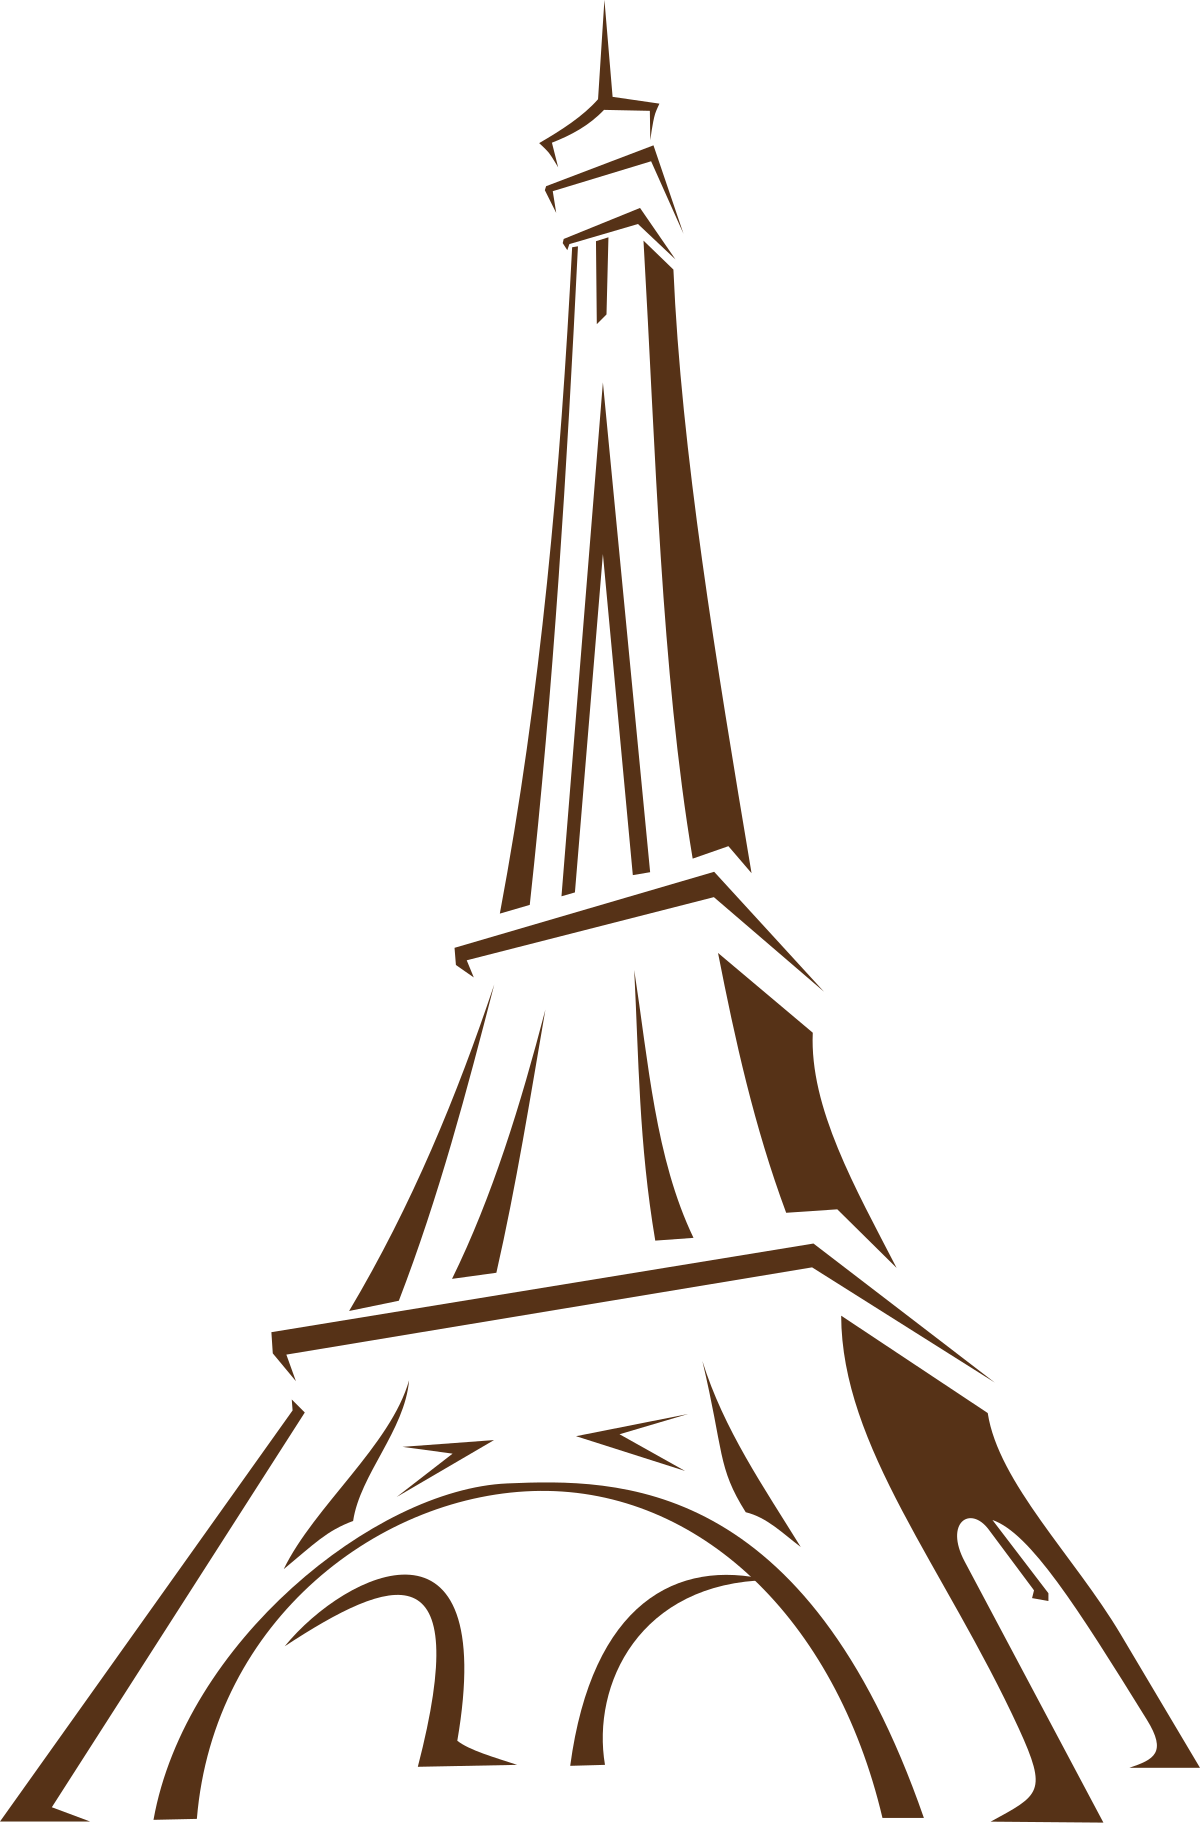 Download File:Eiffel Tower icon - OpenClipart.svg - Wikimedia Commons